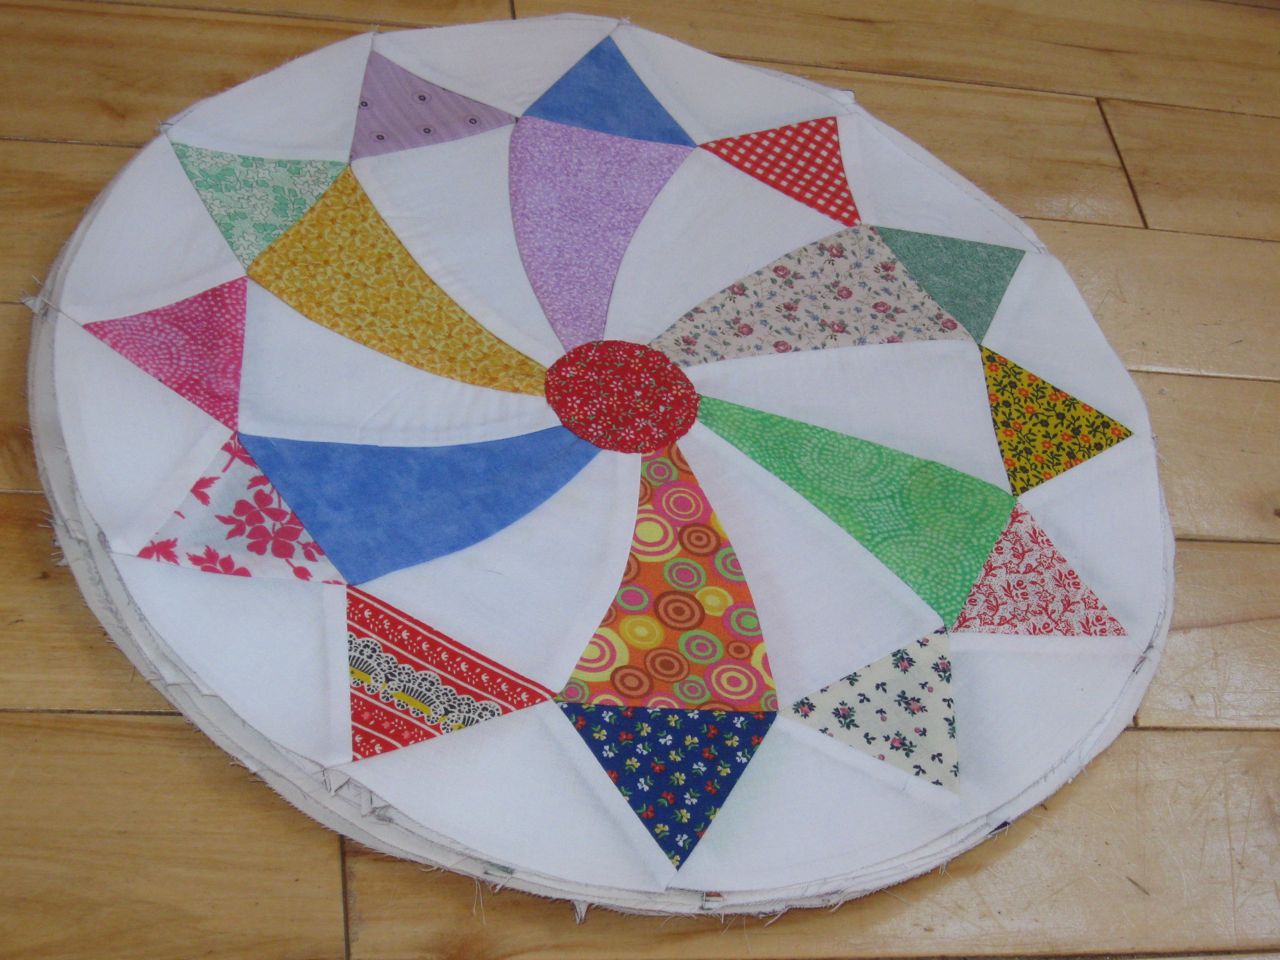 Download Amy's Passions: Rolling Star pattern & how I applique